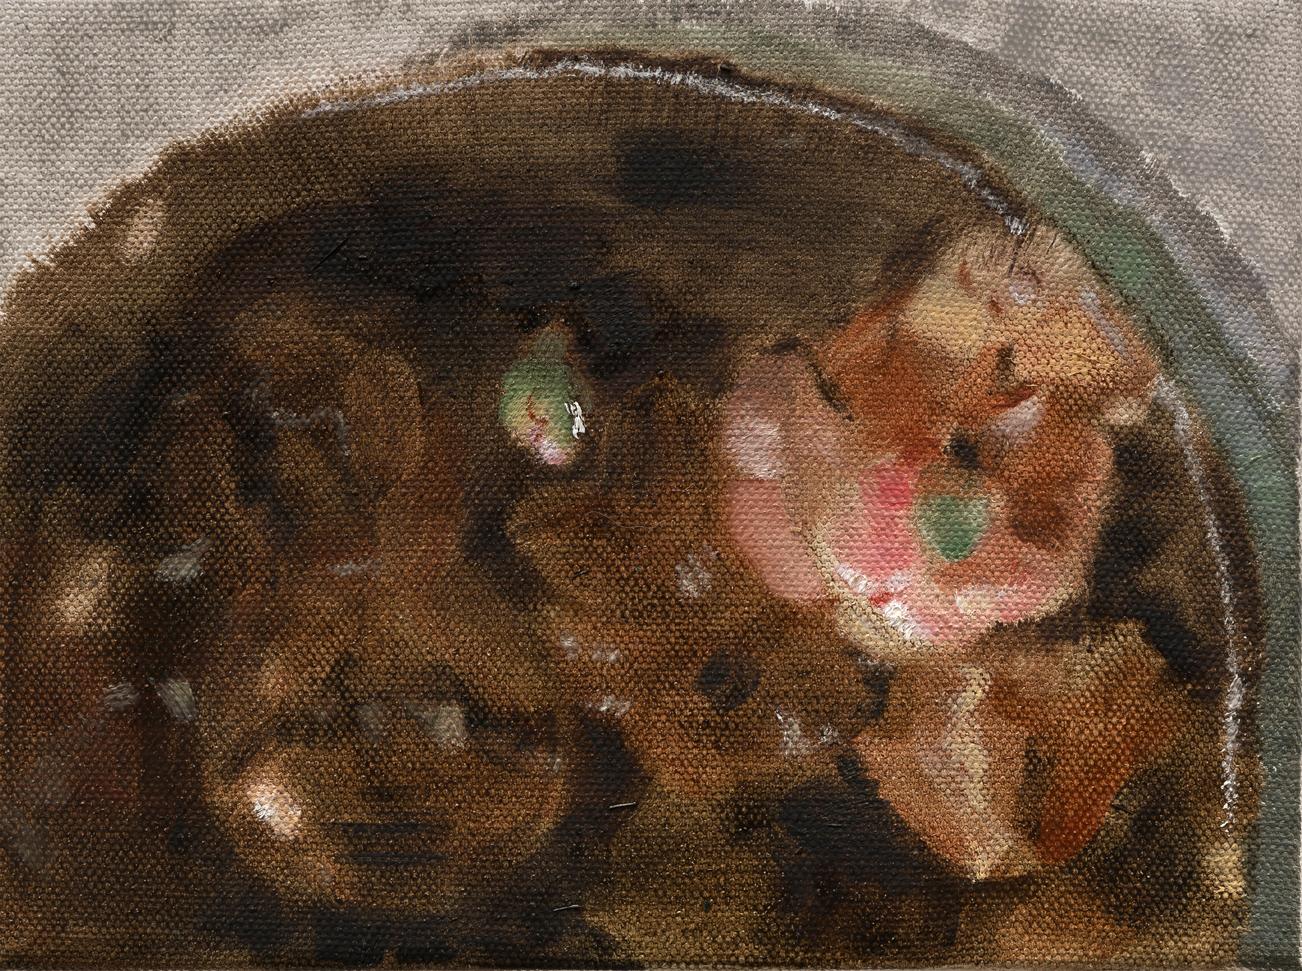 Patty Wickman Abstract Painting - Spent (Camellias in Bird Bath), 7 Mar 14